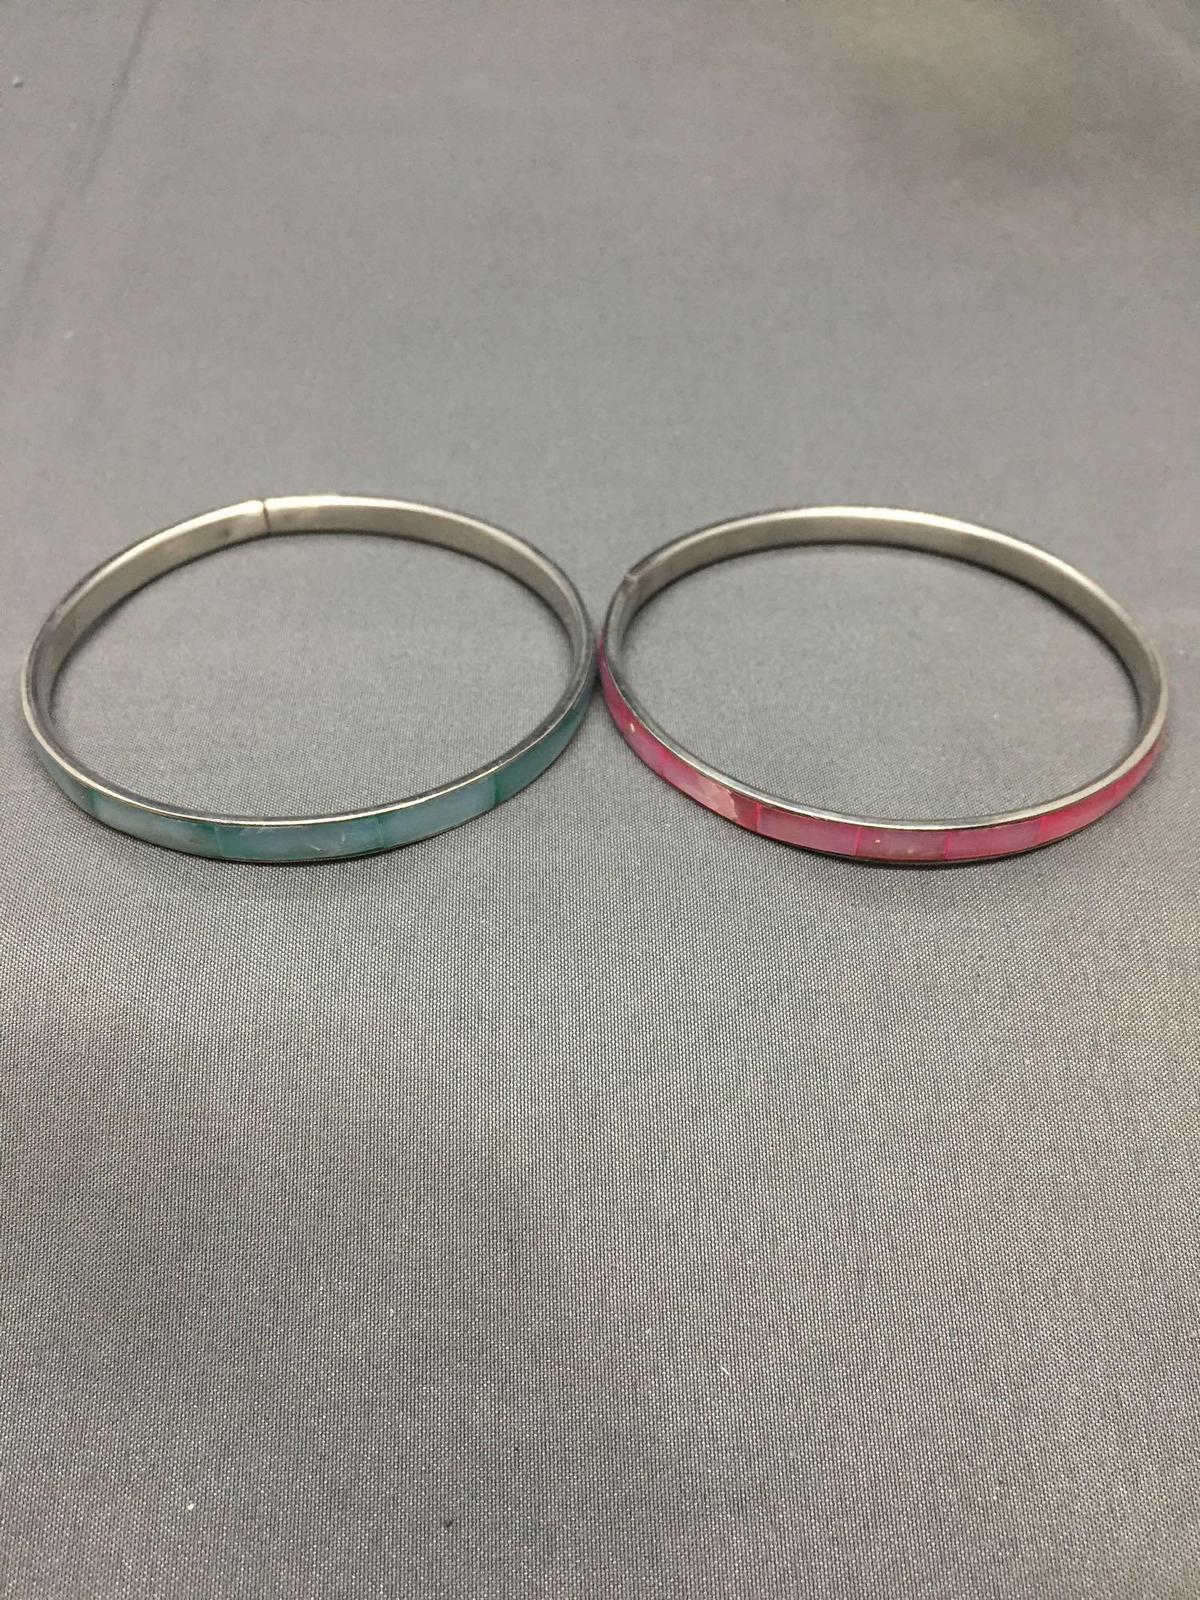 Lot of Two 4.5mm Wide 3in Diameter Fashion Alloy Dyed Mother of Pearl Inlay Fashion Alloy Bangle